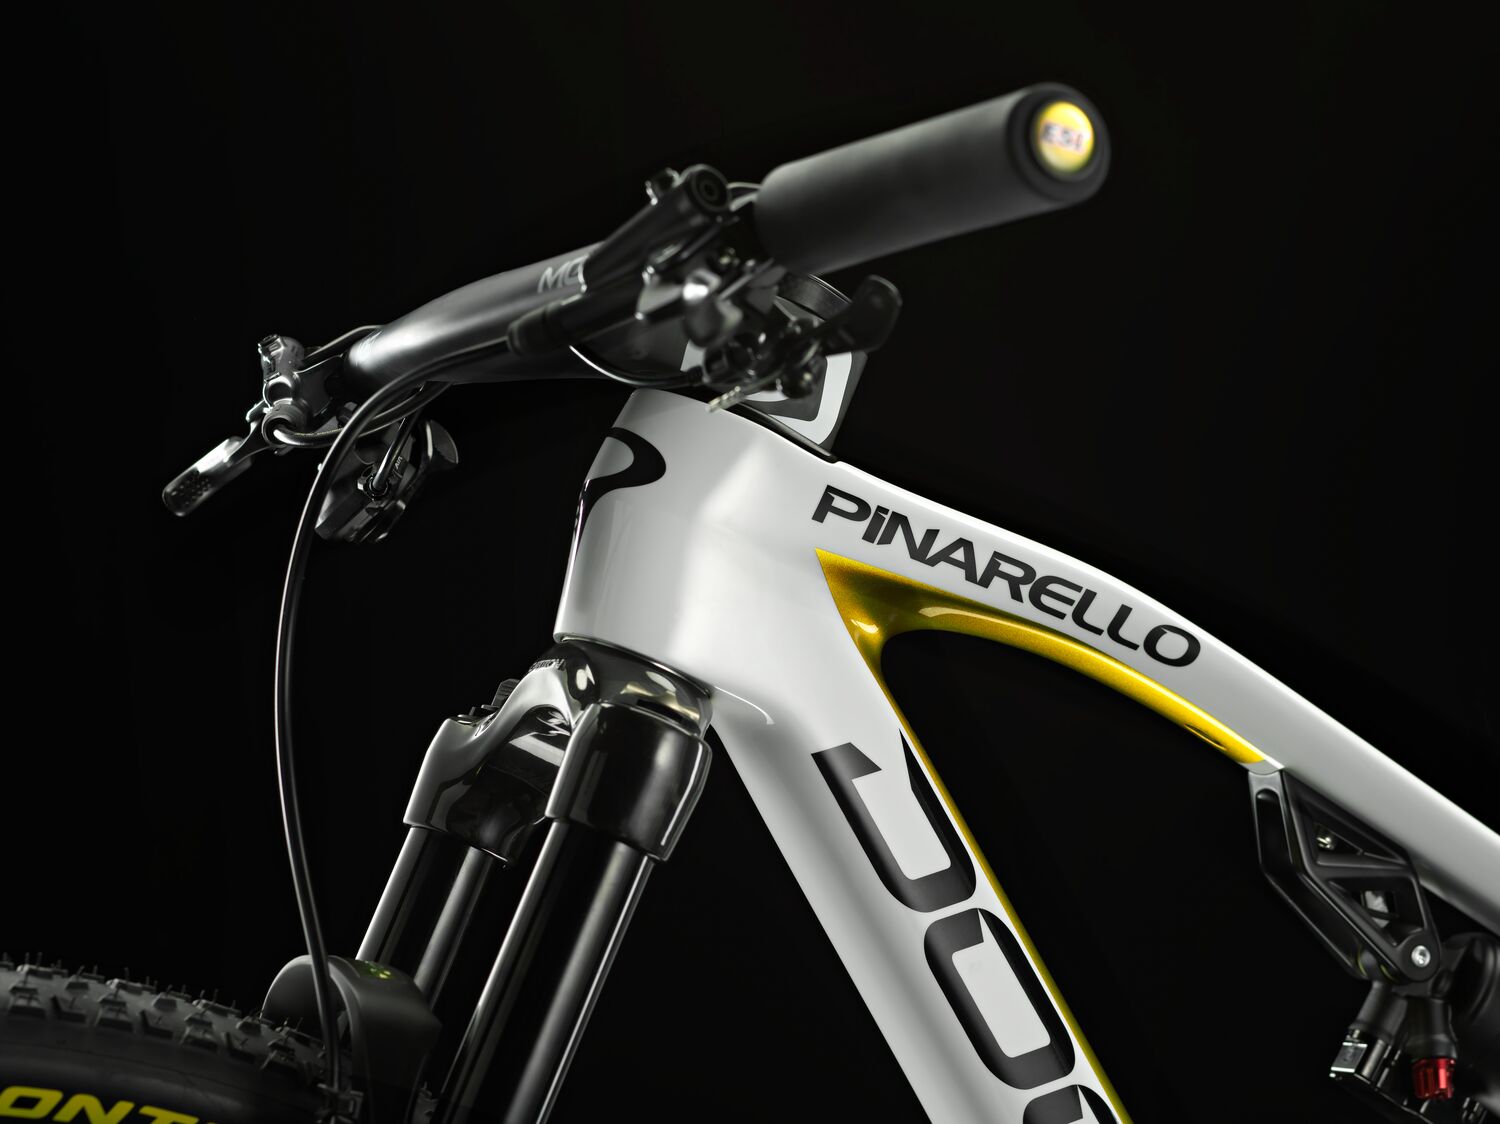 The Pinarello Dogma X road bike has some exciting new seat stays